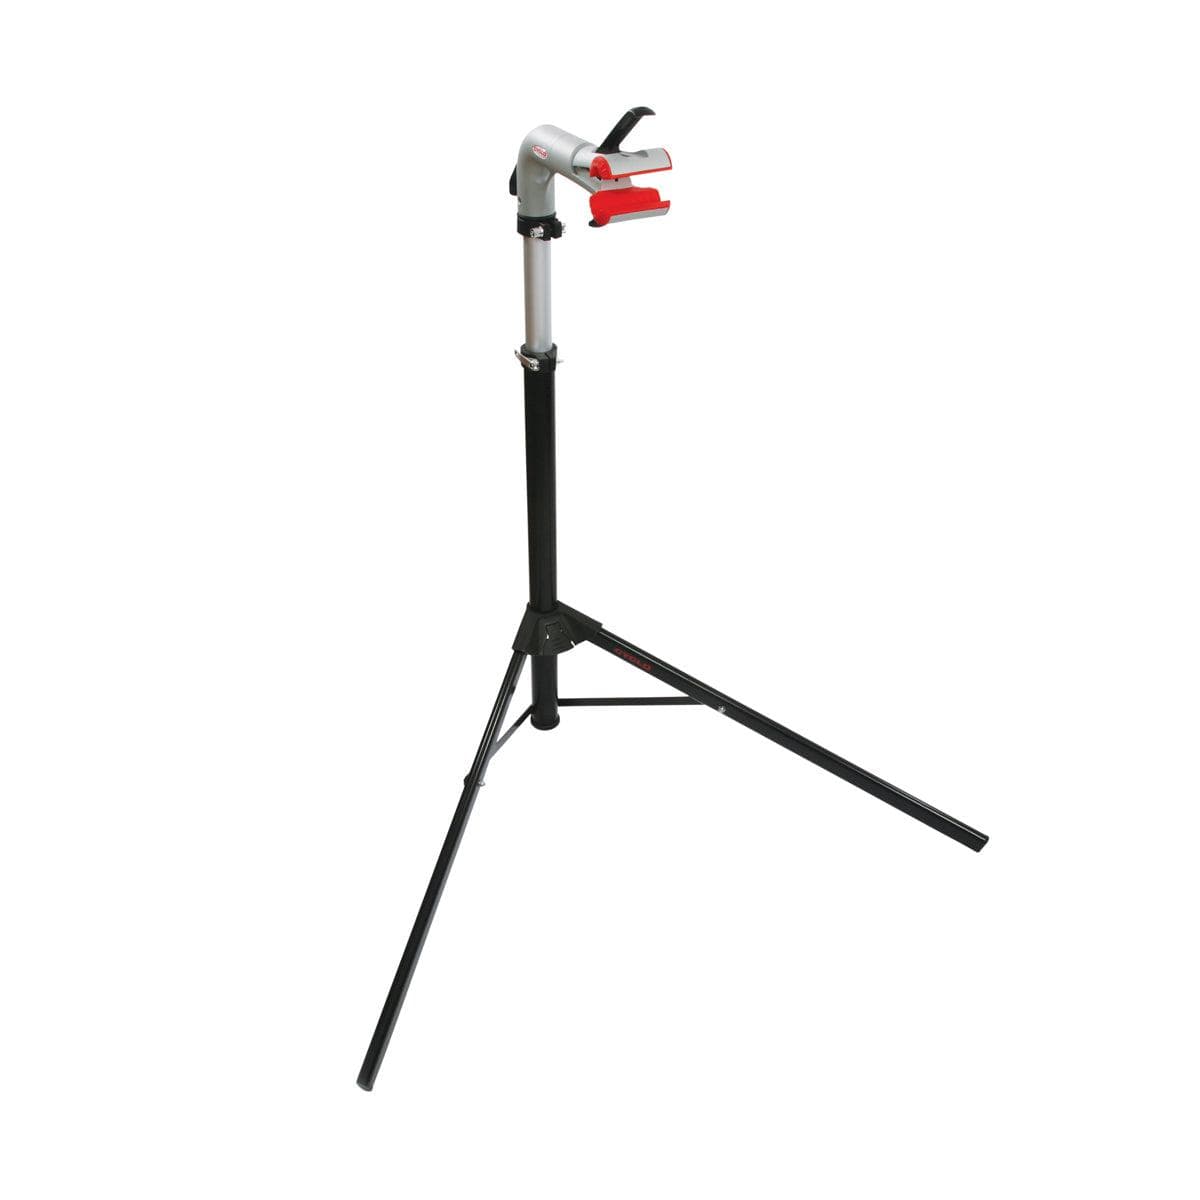 Cyclo Portable Bike Work Stand (Includes Clamp Head):